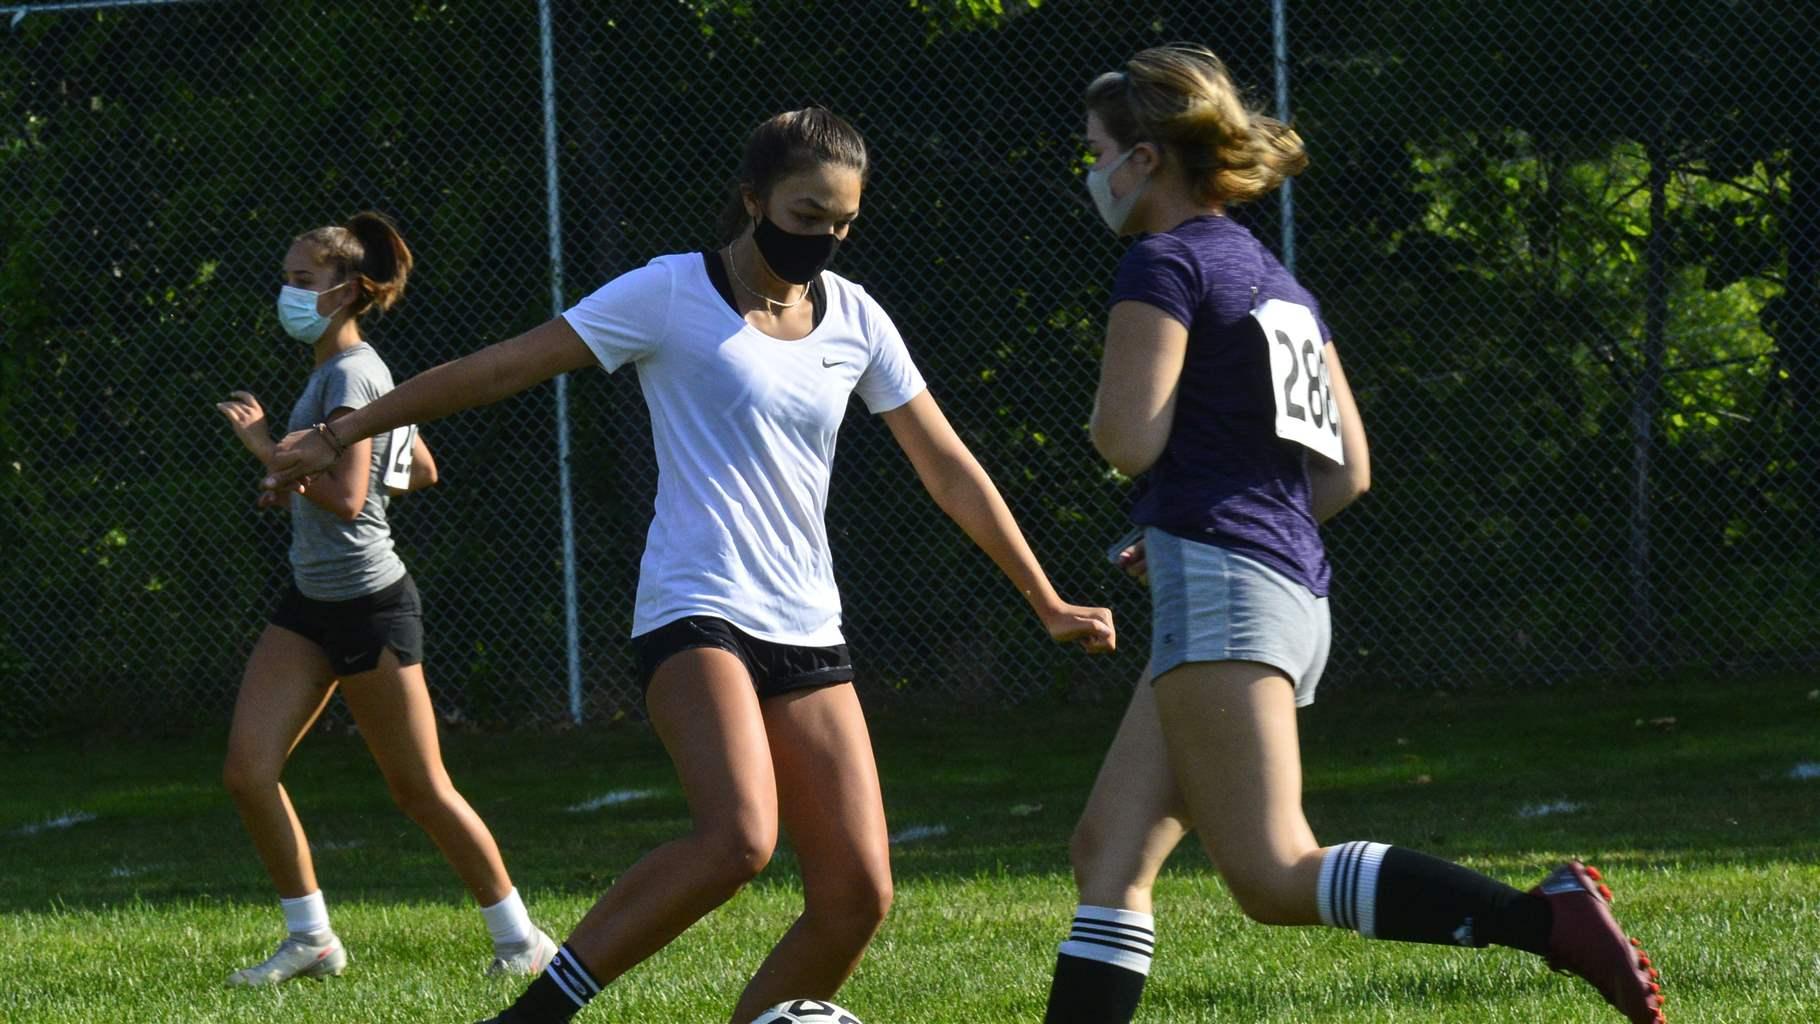 Members of the Brattleboro, Vt., Union High School's girls' varsity soccer team practice for the first time for the season on Tuesday, Sept. 8, 2020, as high school sports returns for the first time since the COVID-19 pandemic canceled the Spring season. 